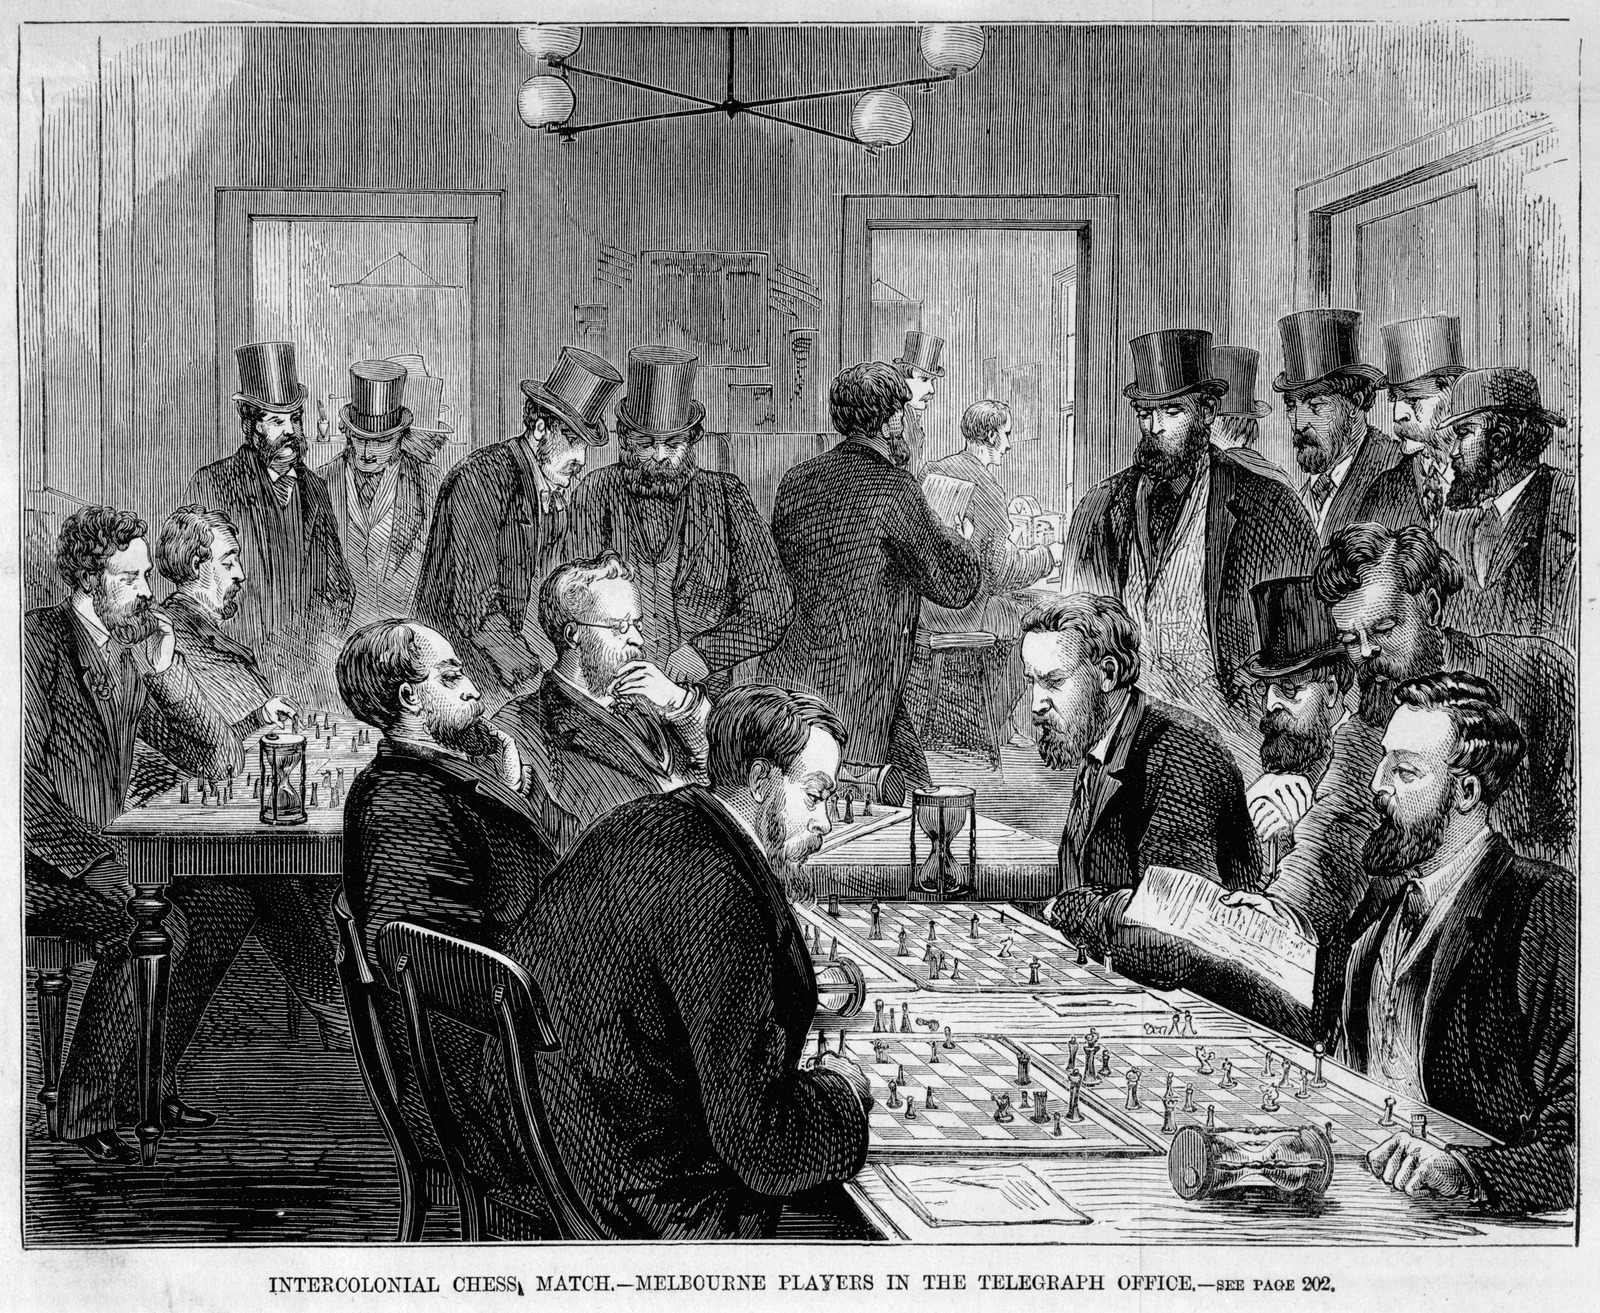 People from the 19th century playing chess by using the telegraph